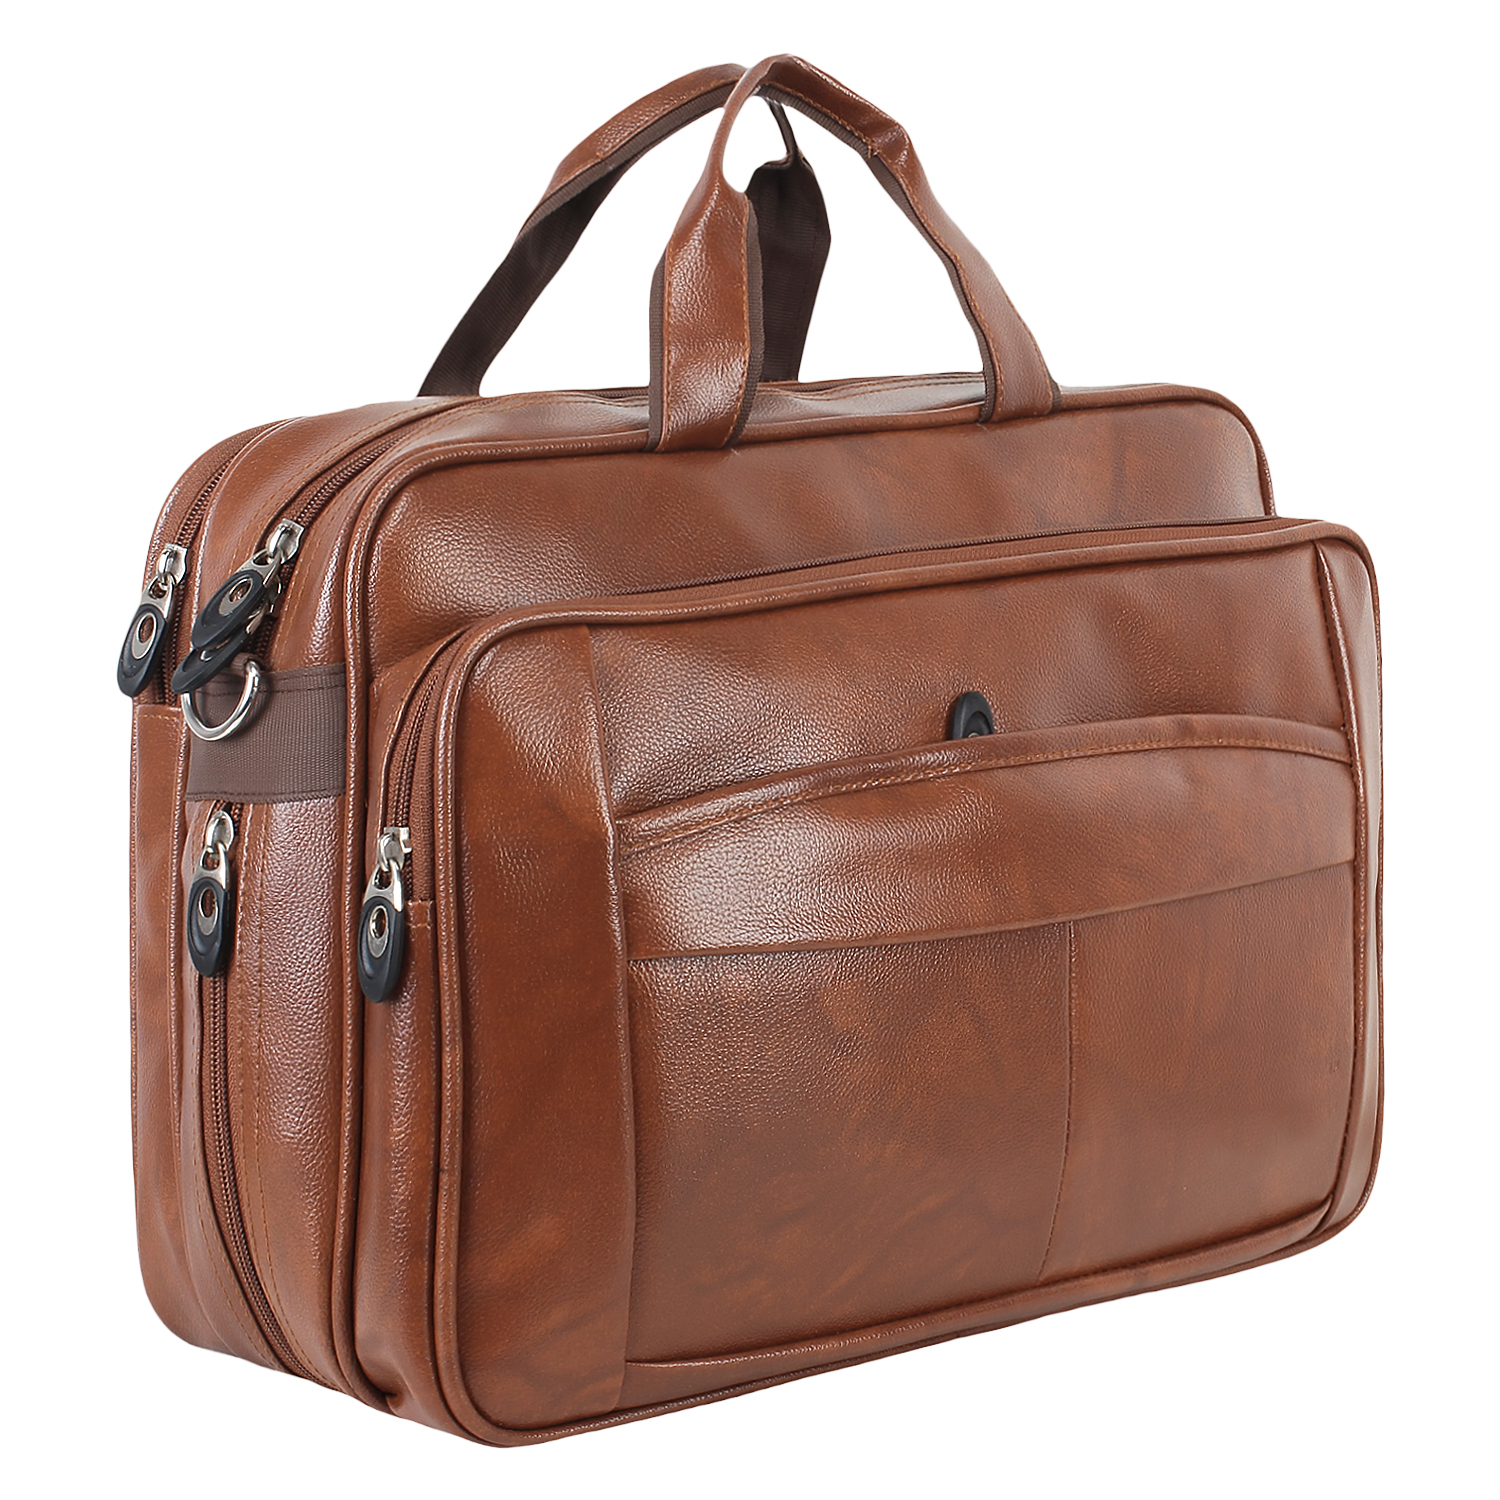 Buy Mens Leather Messenger Bags (Tan Color) Online @ ₹1449 from ShopClues